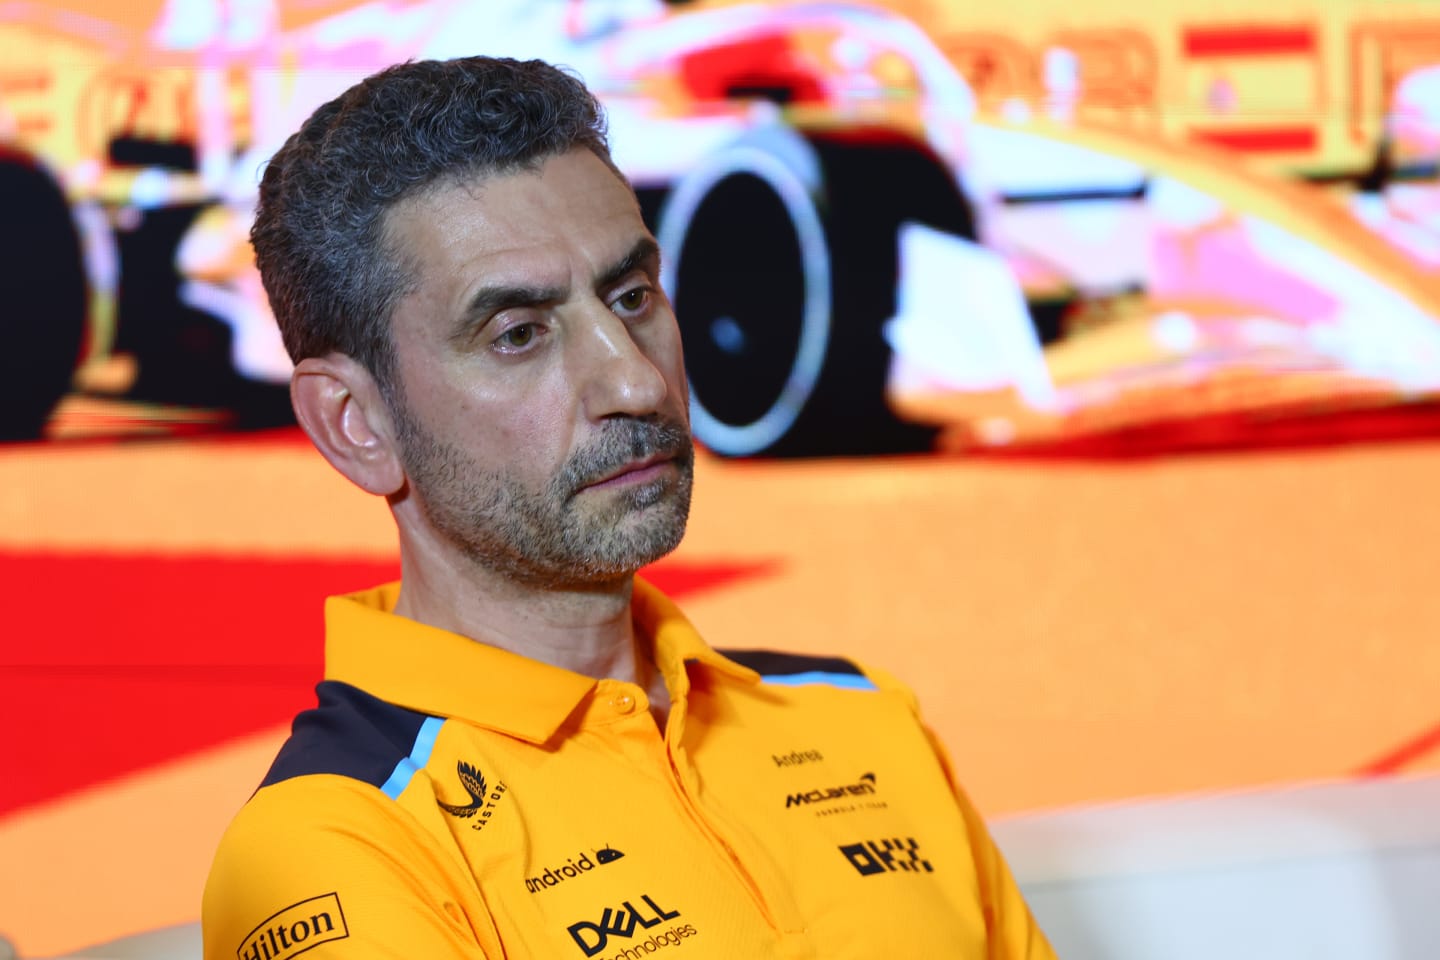 BARCELONA, SPAIN - JUNE 02: McLaren Team Principal Andrea Stella attends the Team Principals Press Conference during practice ahead of the F1 Grand Prix of Spain at Circuit de Barcelona-Catalunya on June 02, 2023 in Barcelona, Spain. (Photo by Dan Istitene/Getty Images)